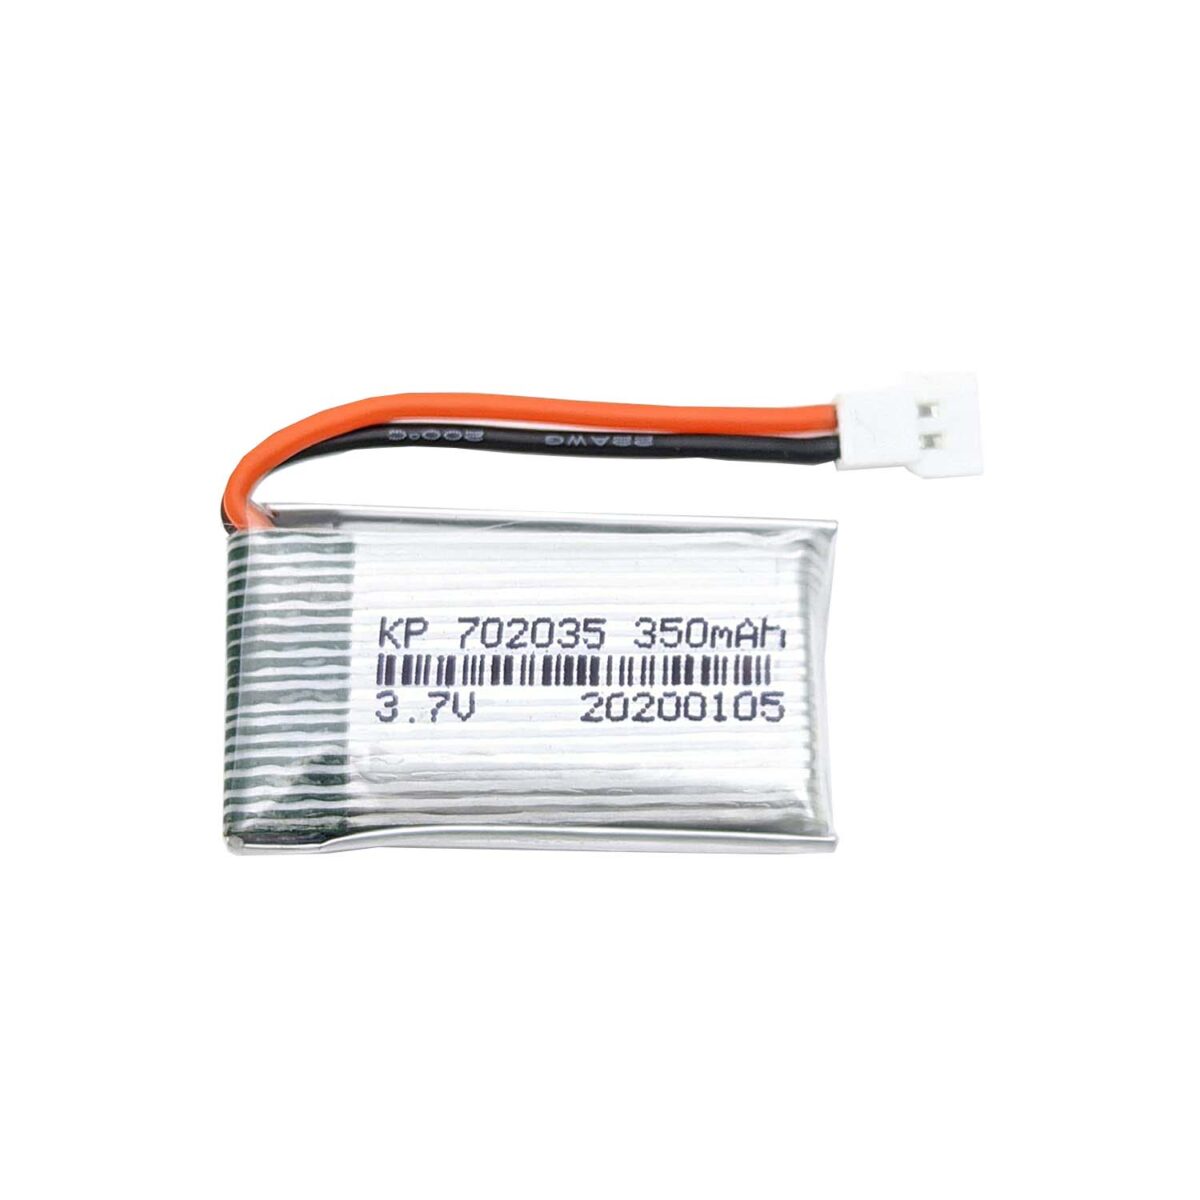 Lipo Rechargeable Battery-3.7V/350mAH-KP-702035 For RC Drone